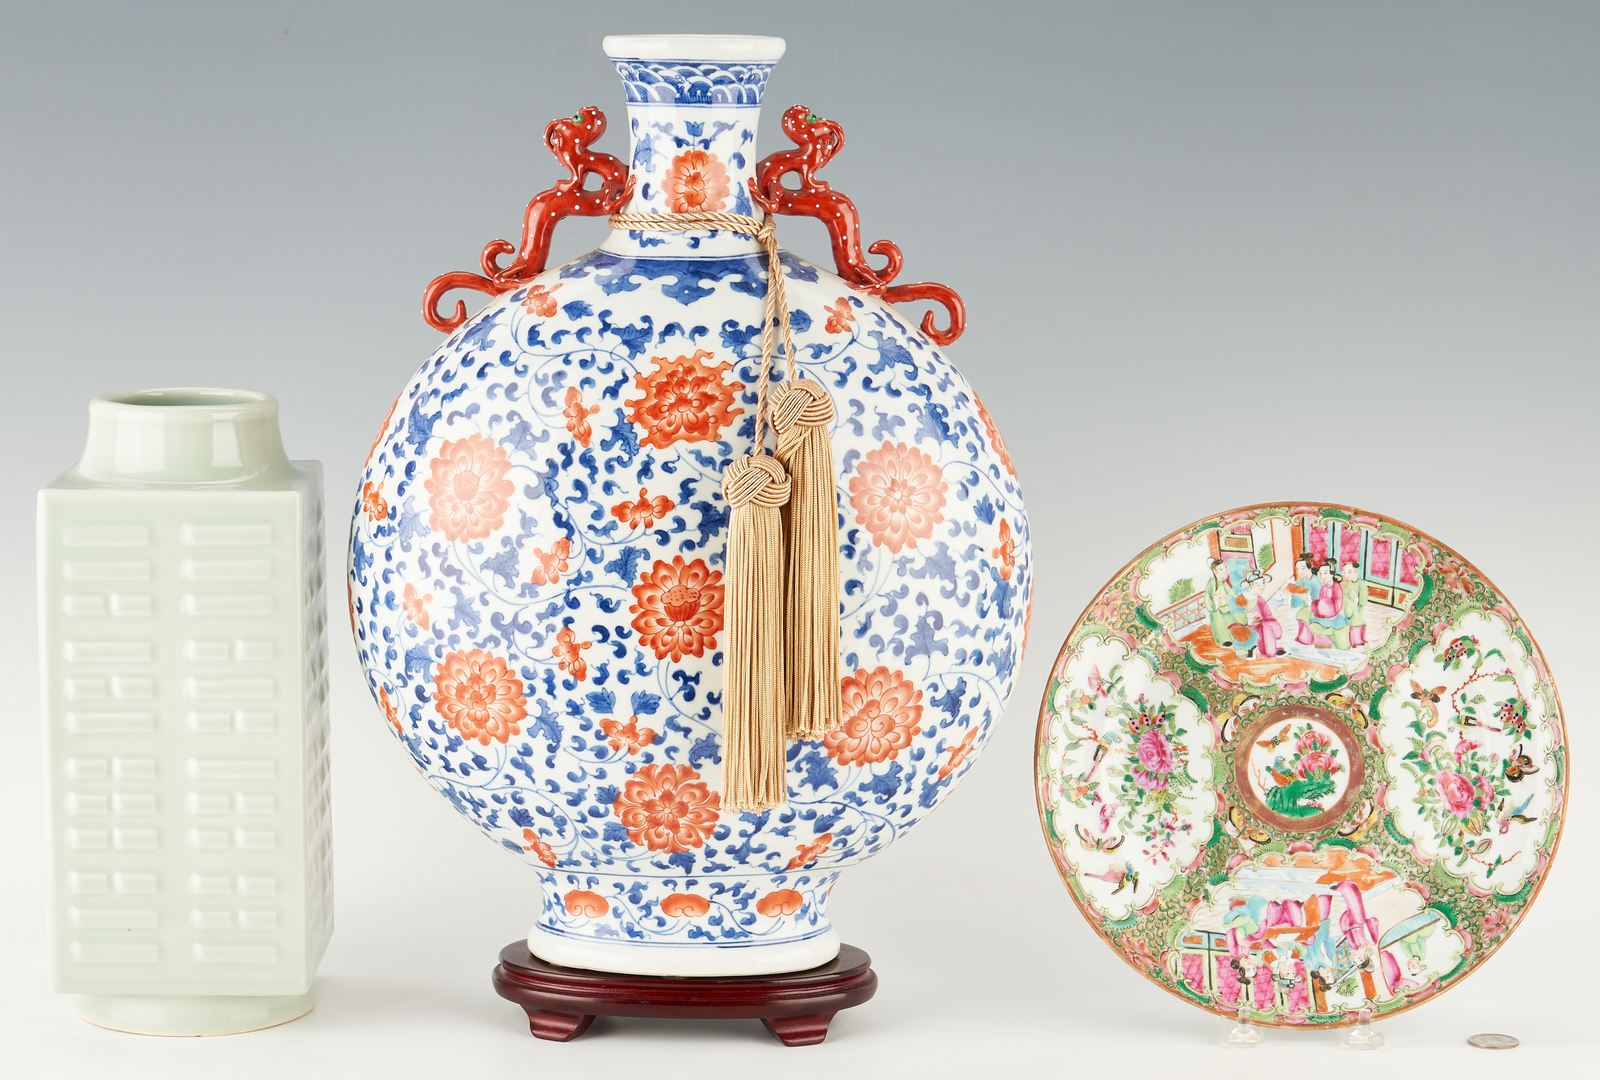 Lot 1176: Chinese Porcelain Moon Flask, Cong Vase, and Rose Medallion Plate